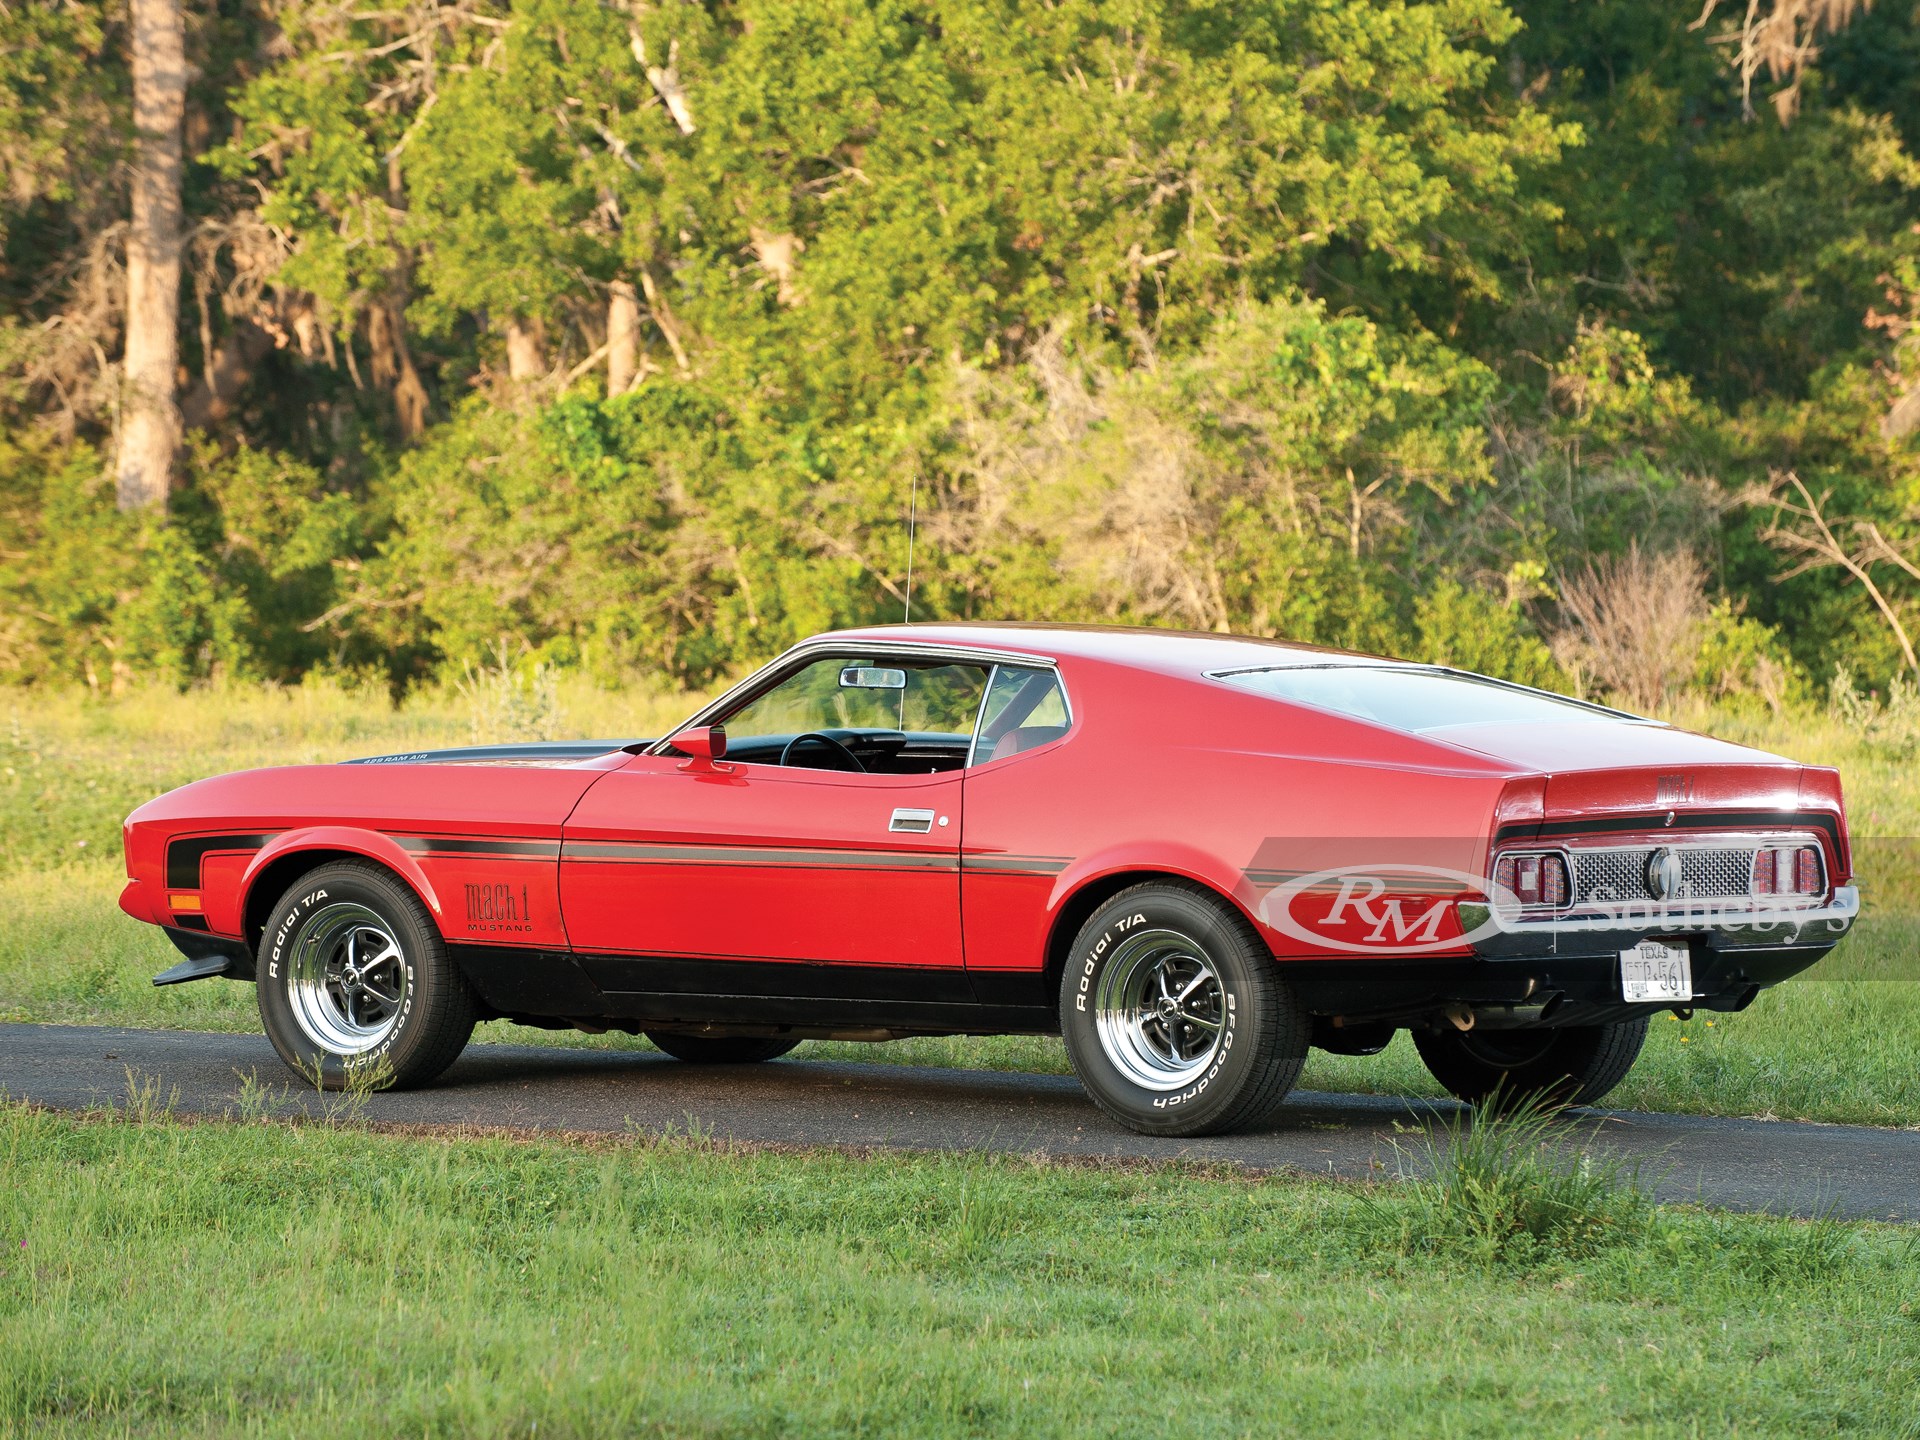 1971 Ford Mustang Mach 1 429 Sportsroof | The Charlie Thomas Collection ...